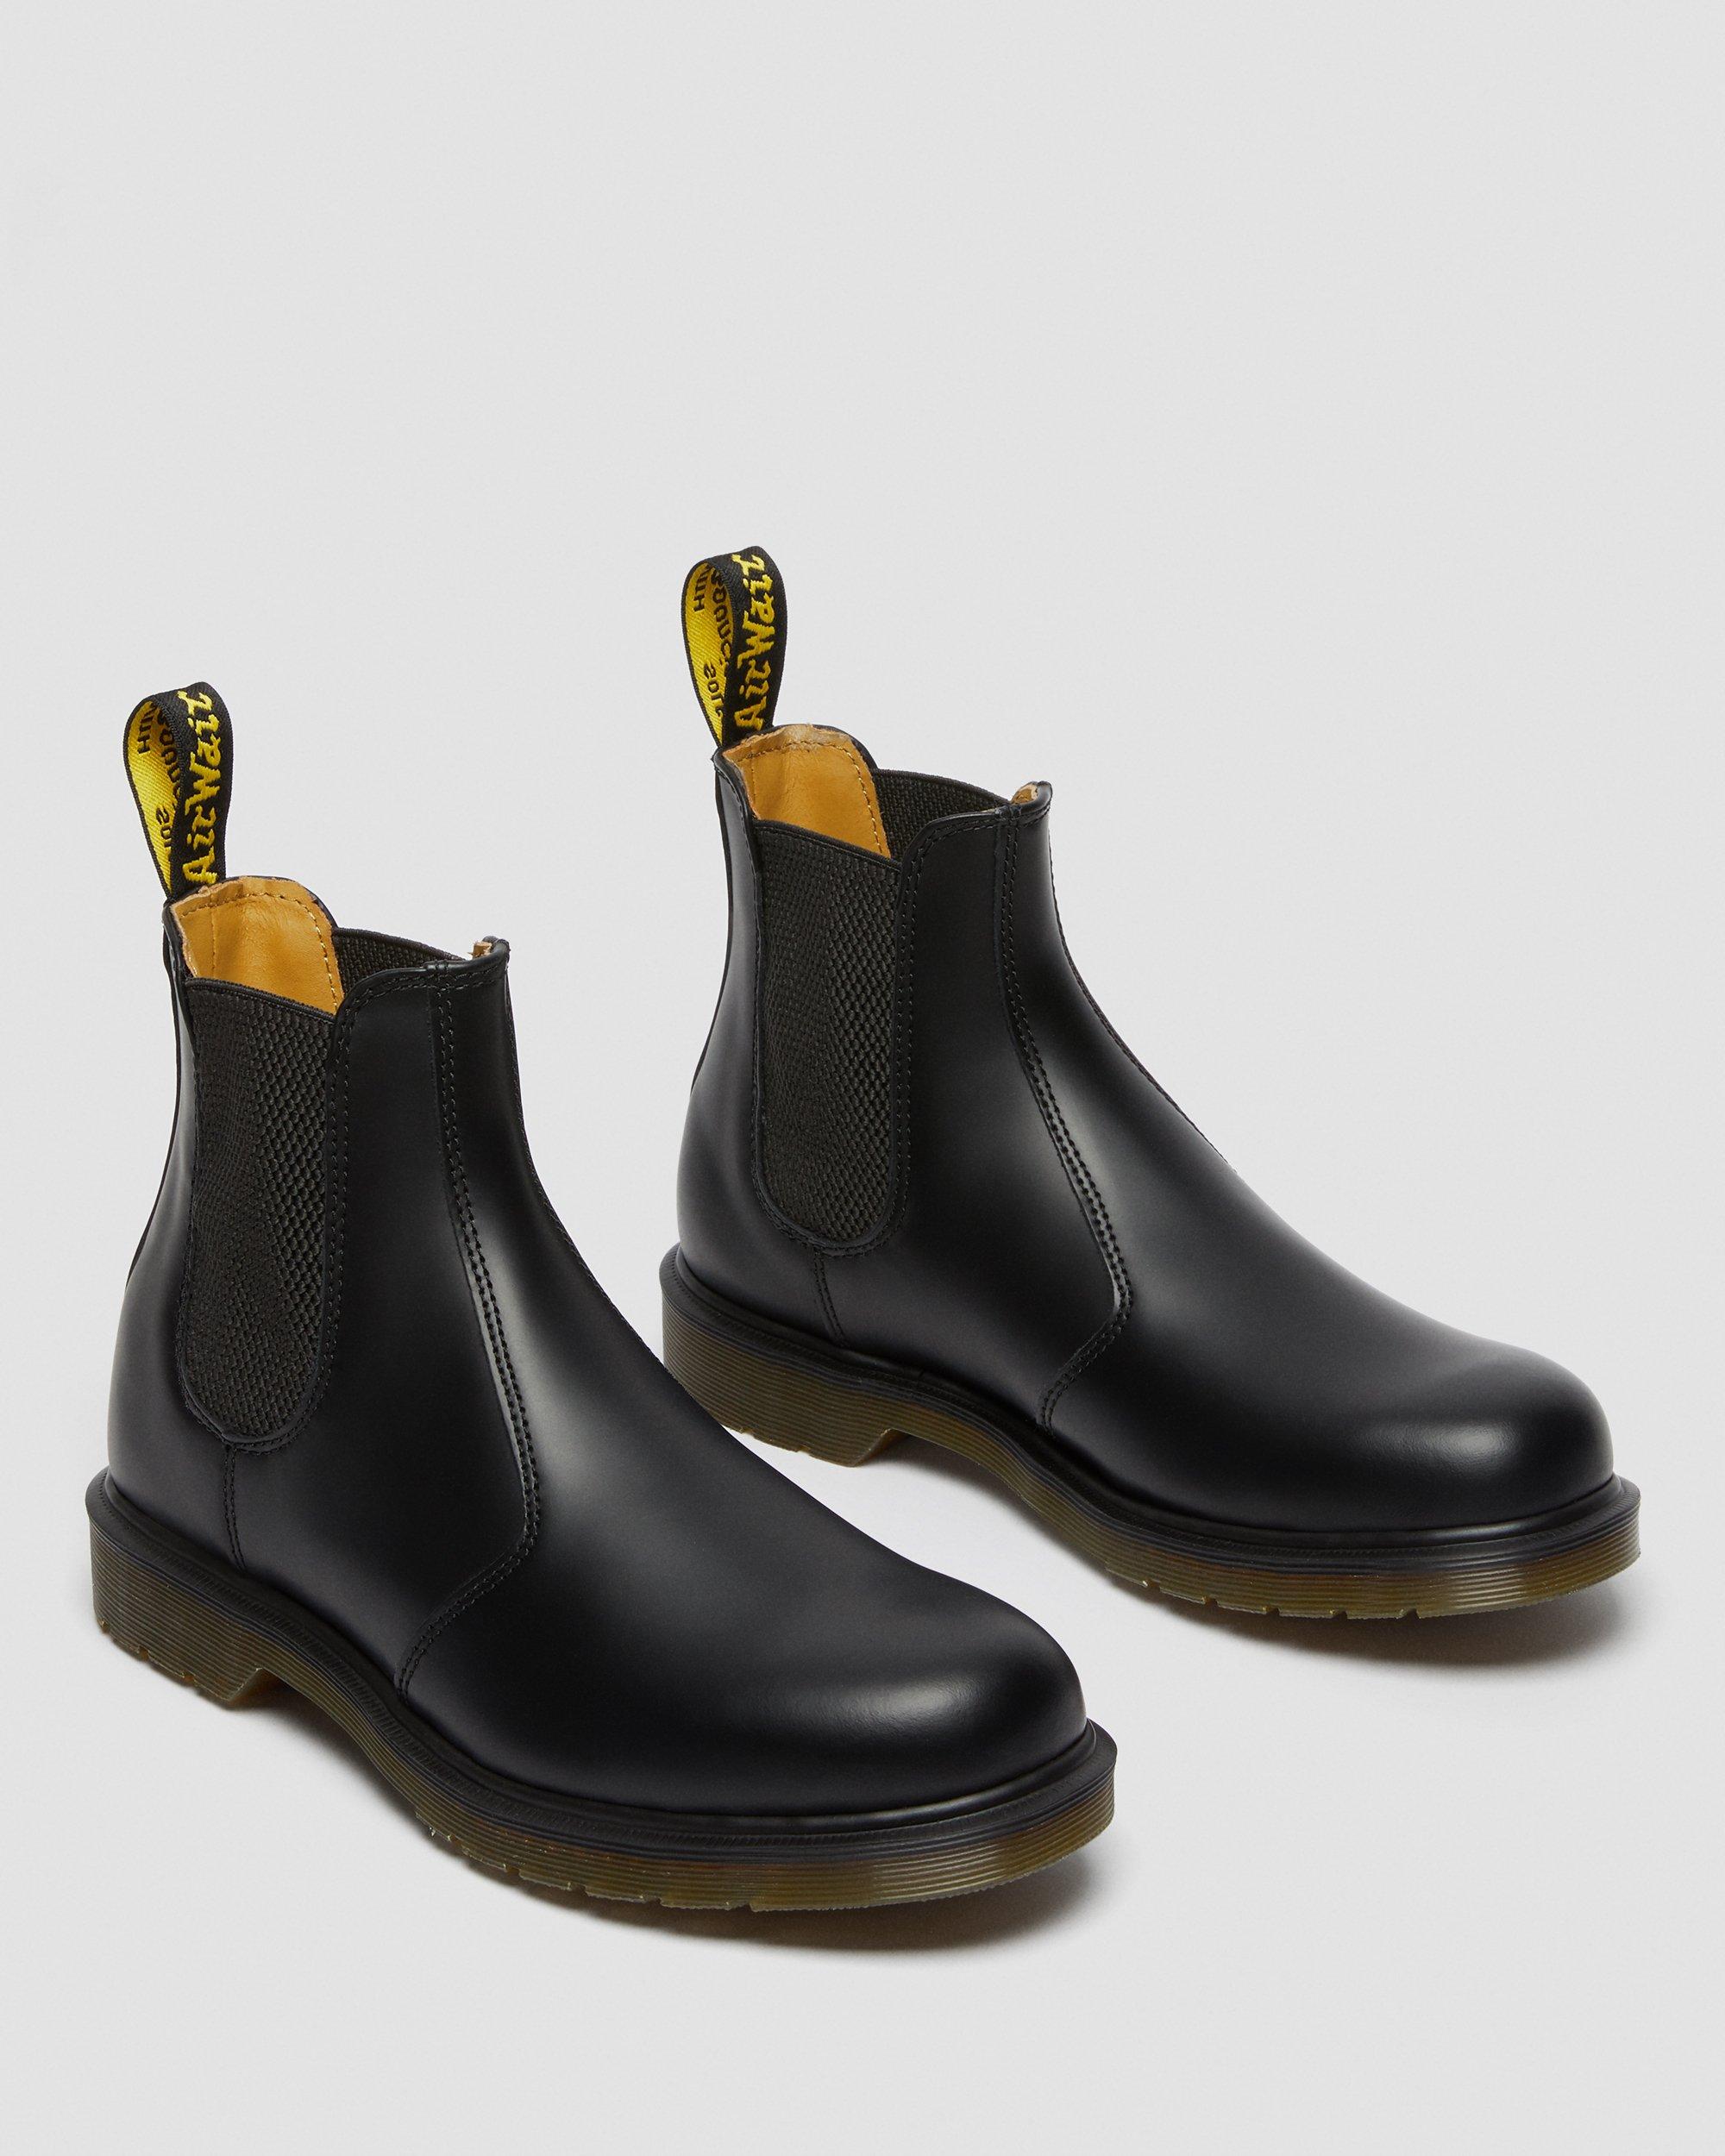 2976 Smooth Leather Chelsea Boots in Black, Dr. Martens